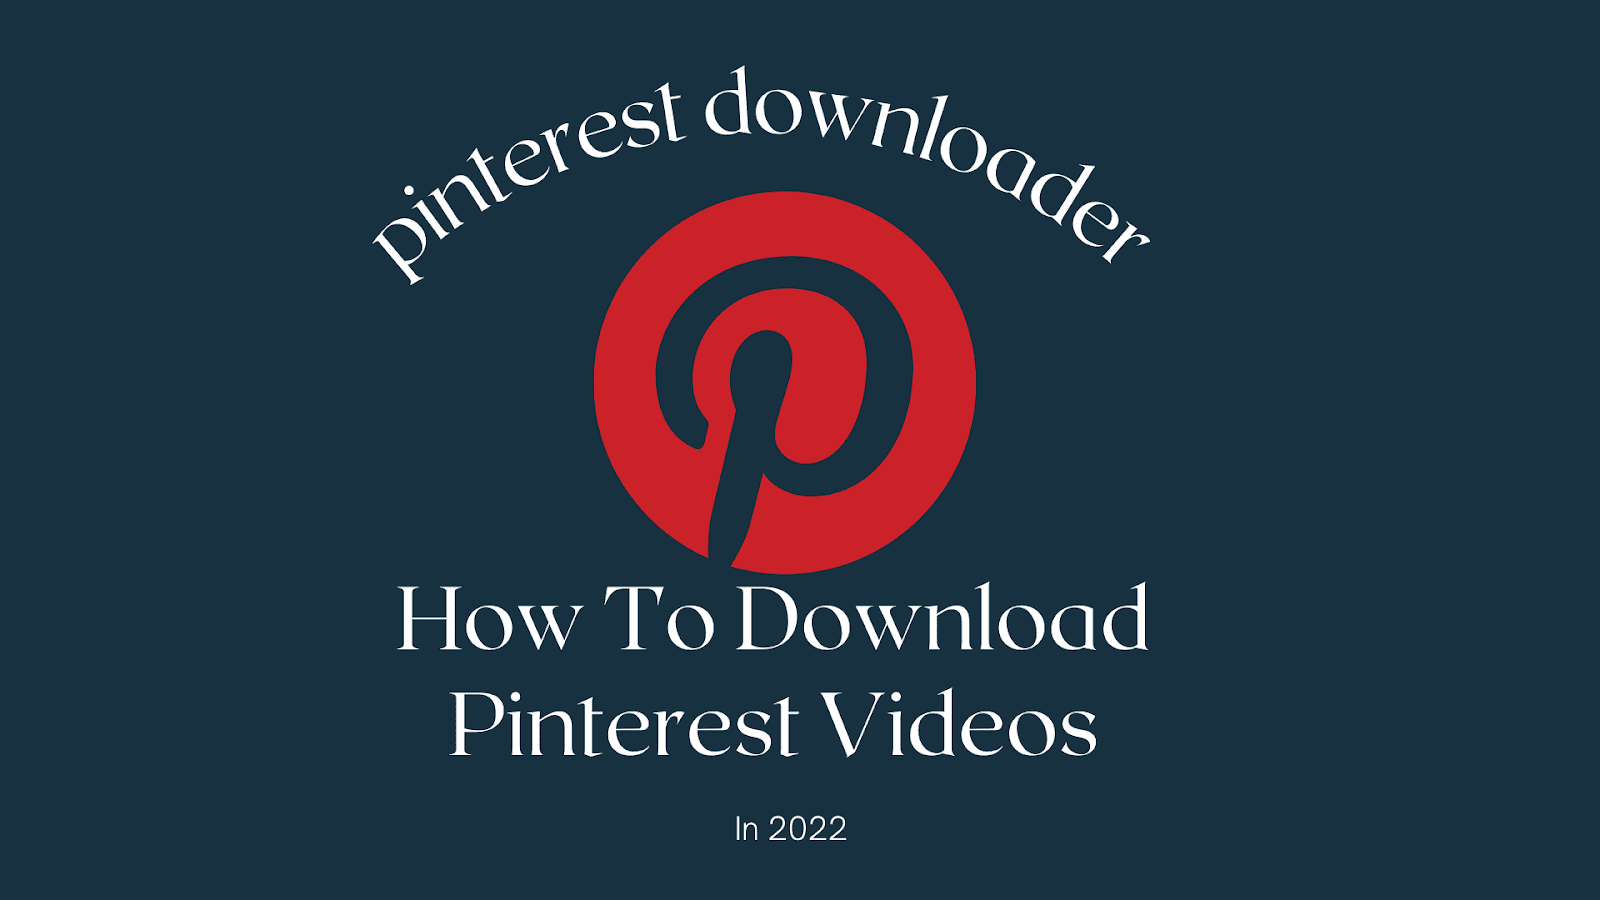 How To Download Pinterest Videos In 2022